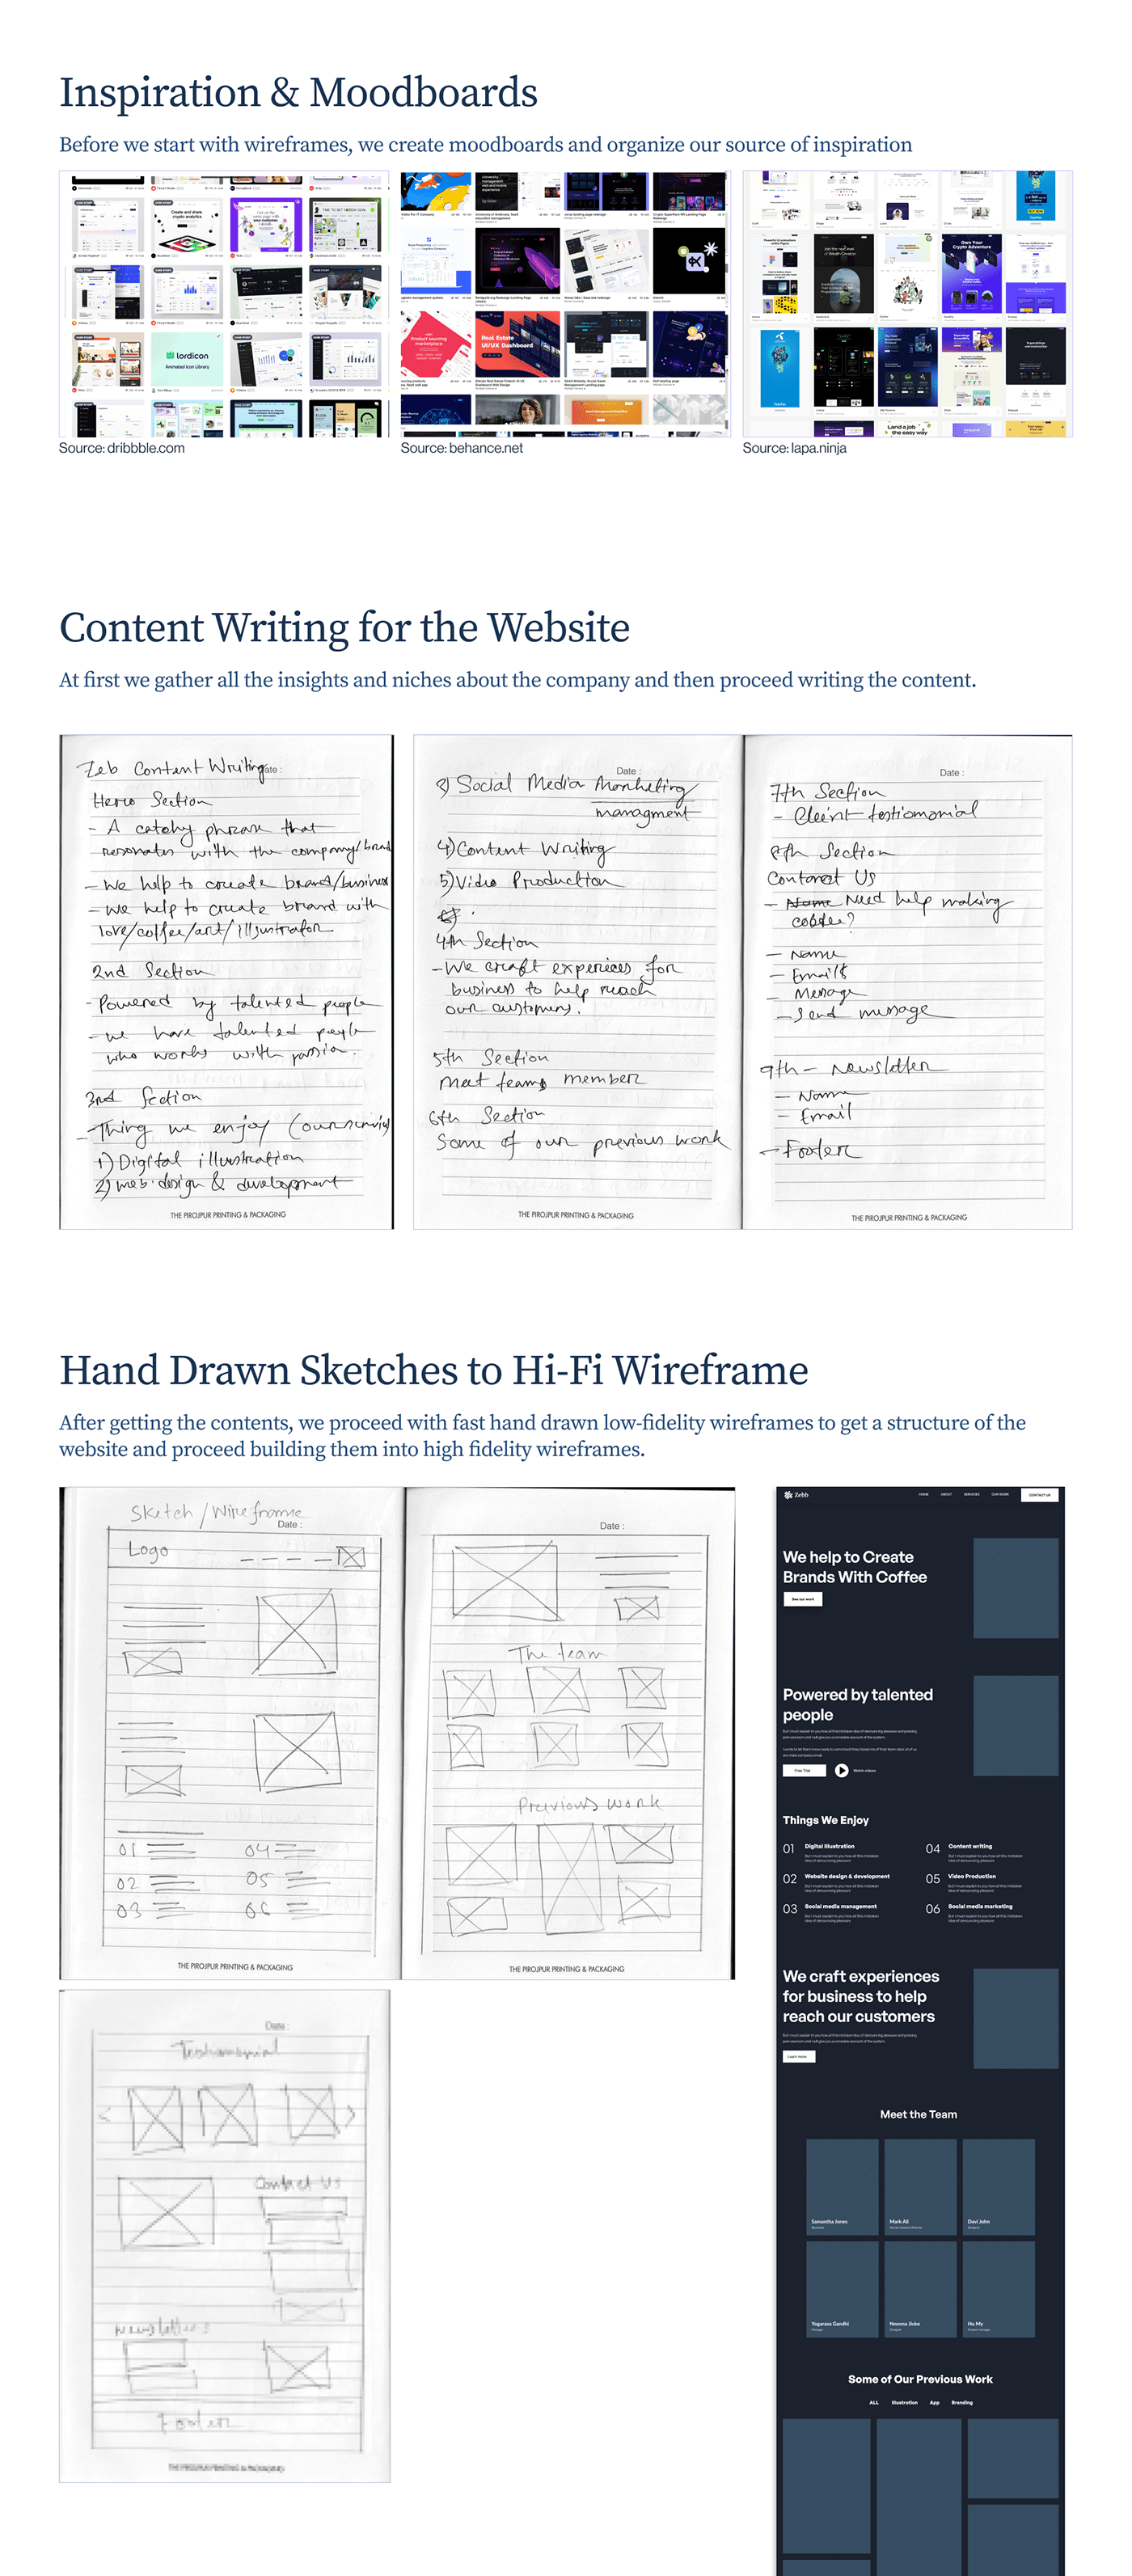 Moodboard, content writing, low fidelity and high fidelity wireframes